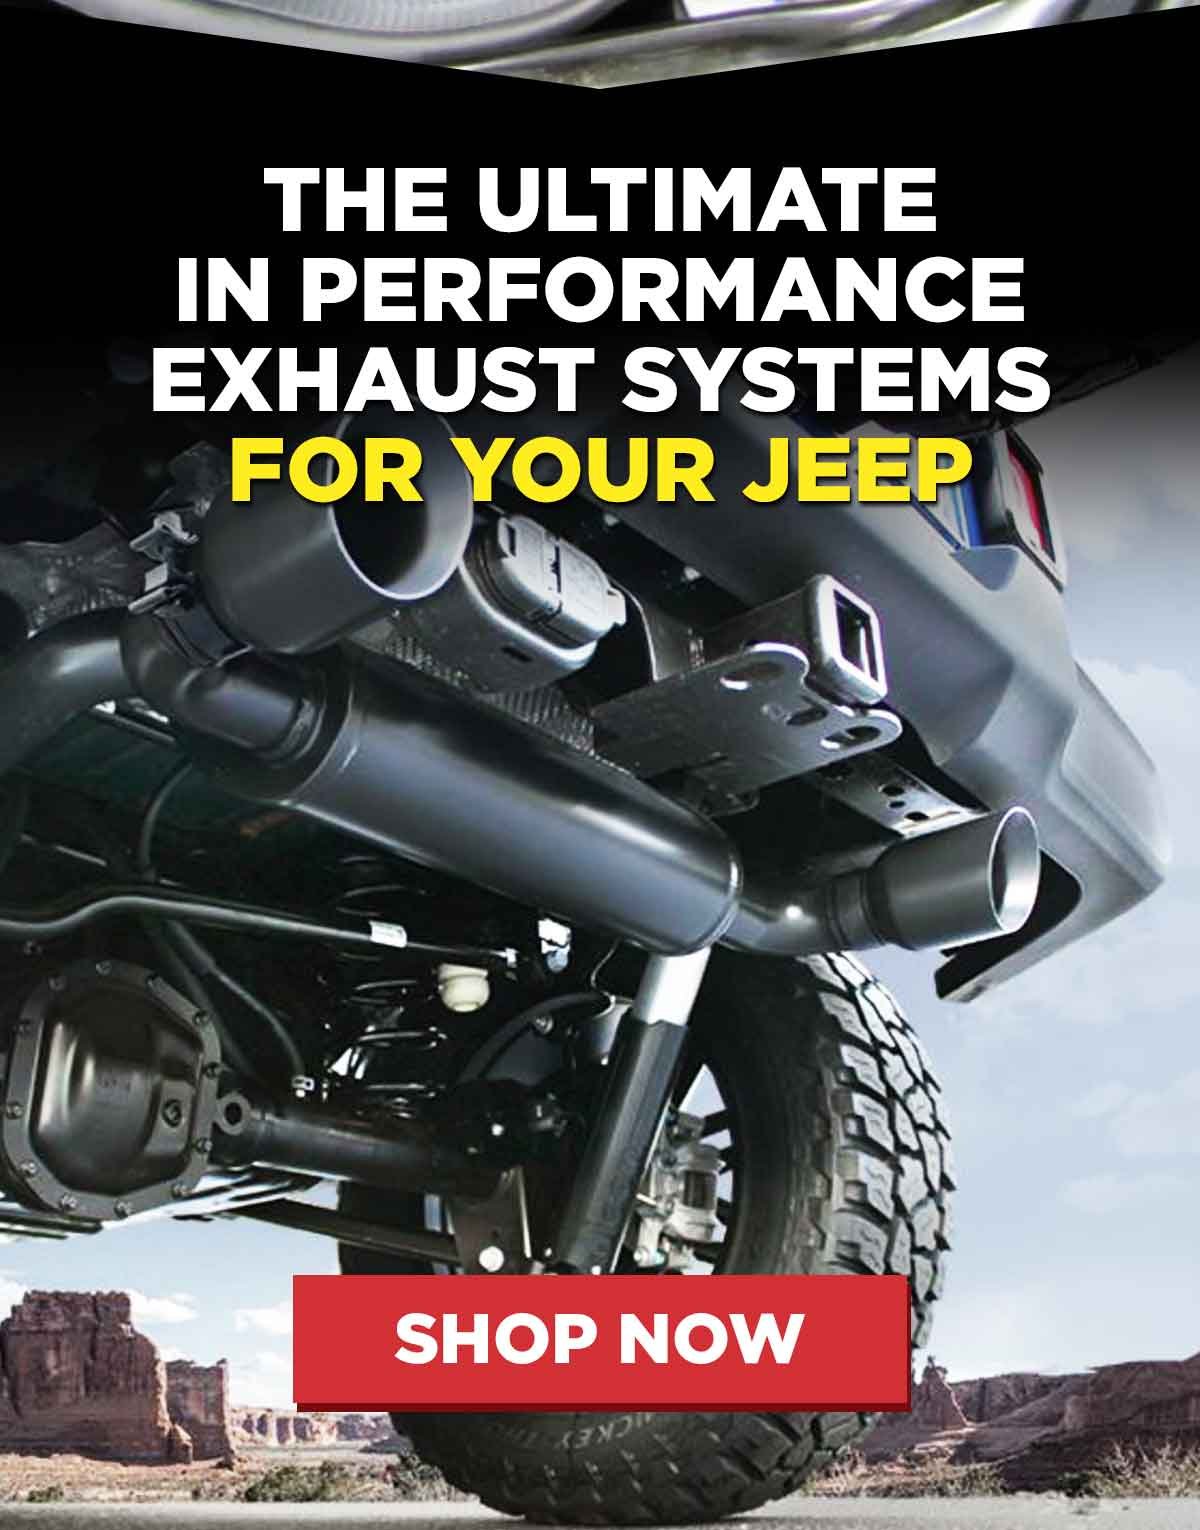 The Ultimate In Performance Exhaust Systems For Your Jeep